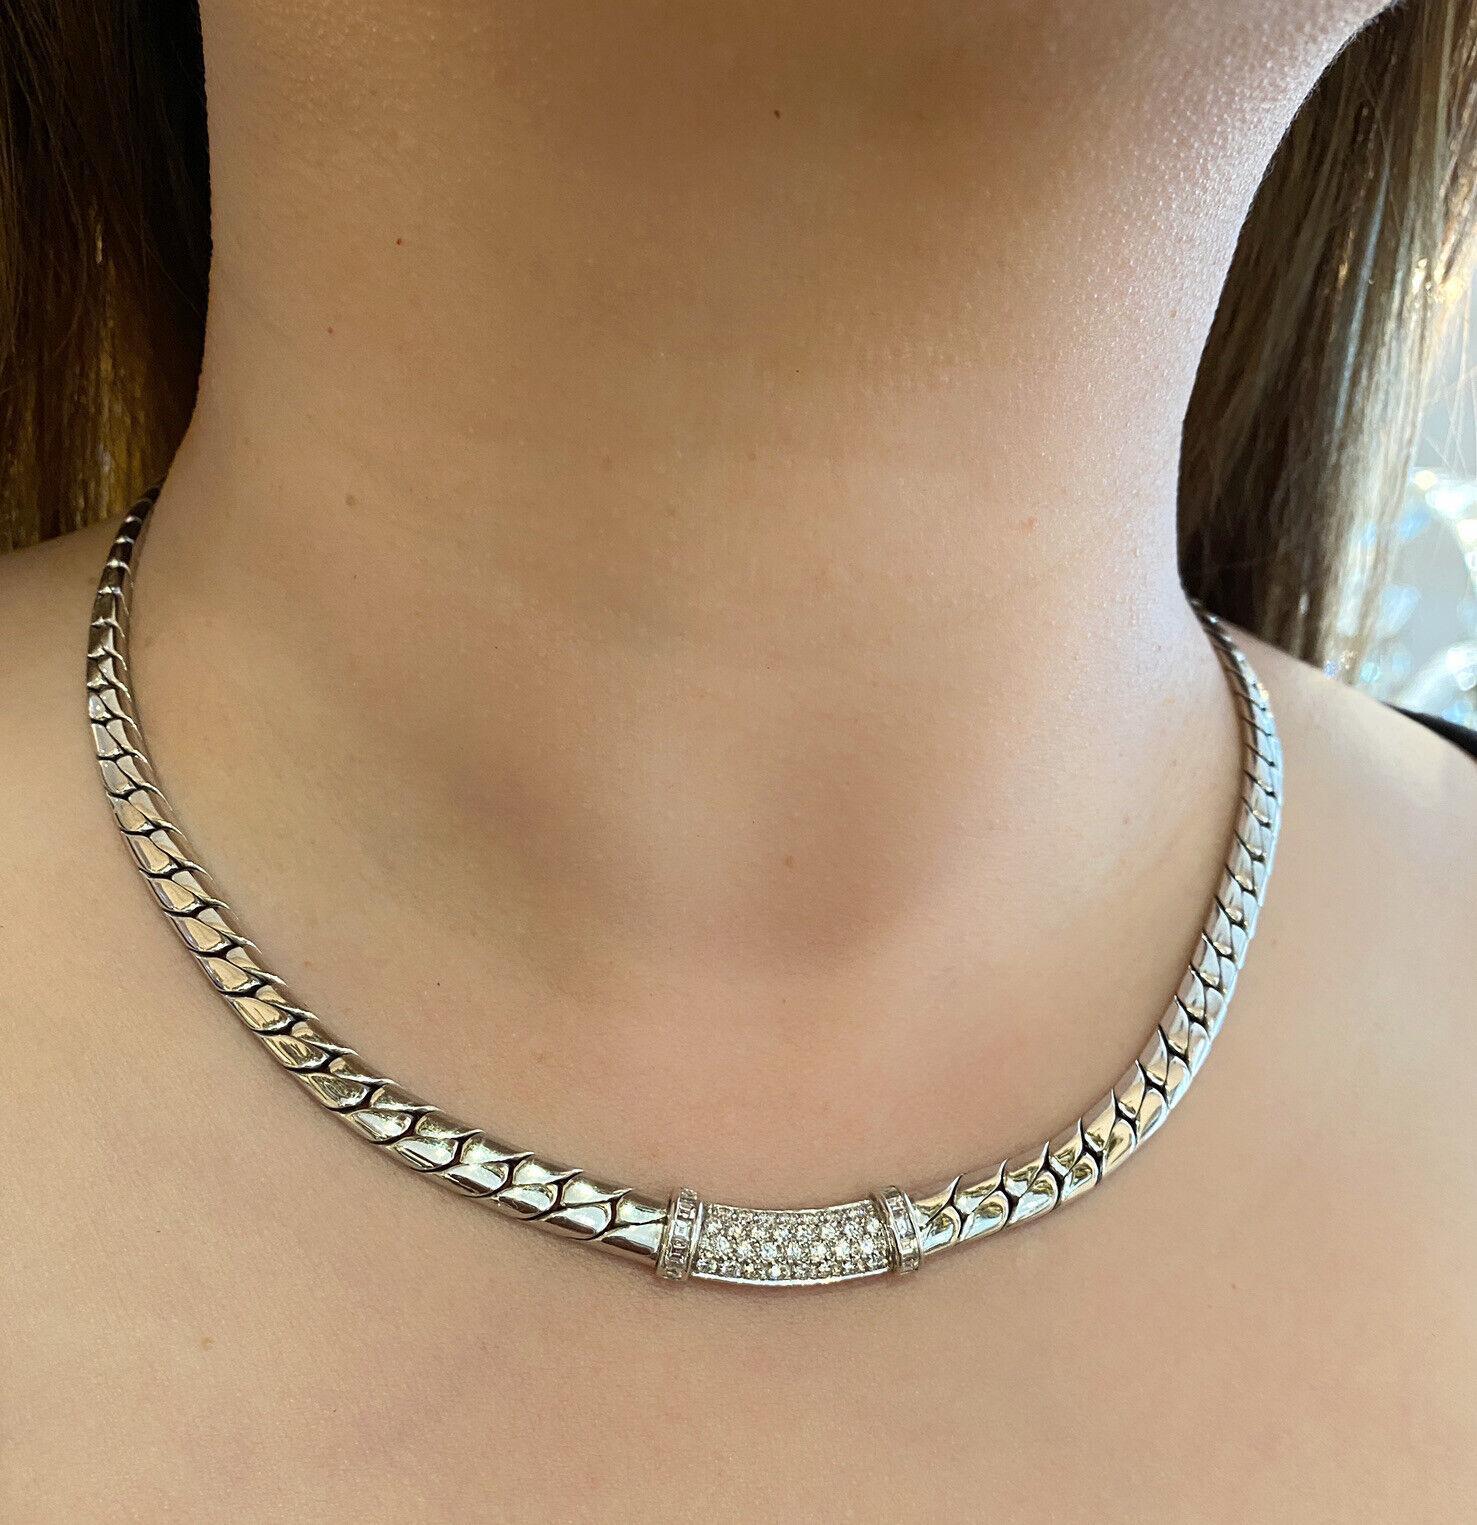 PICCHIOTTI Pavé Diamond Curb Link Necklace in 18k White Gold

Diamond Choker Necklace by Picchiotti features a center section of Round Brilliant Diamonds Pavé set and edged with Square Cut Diamonds set in 18k White Gold with a Smooth Curb link Chain